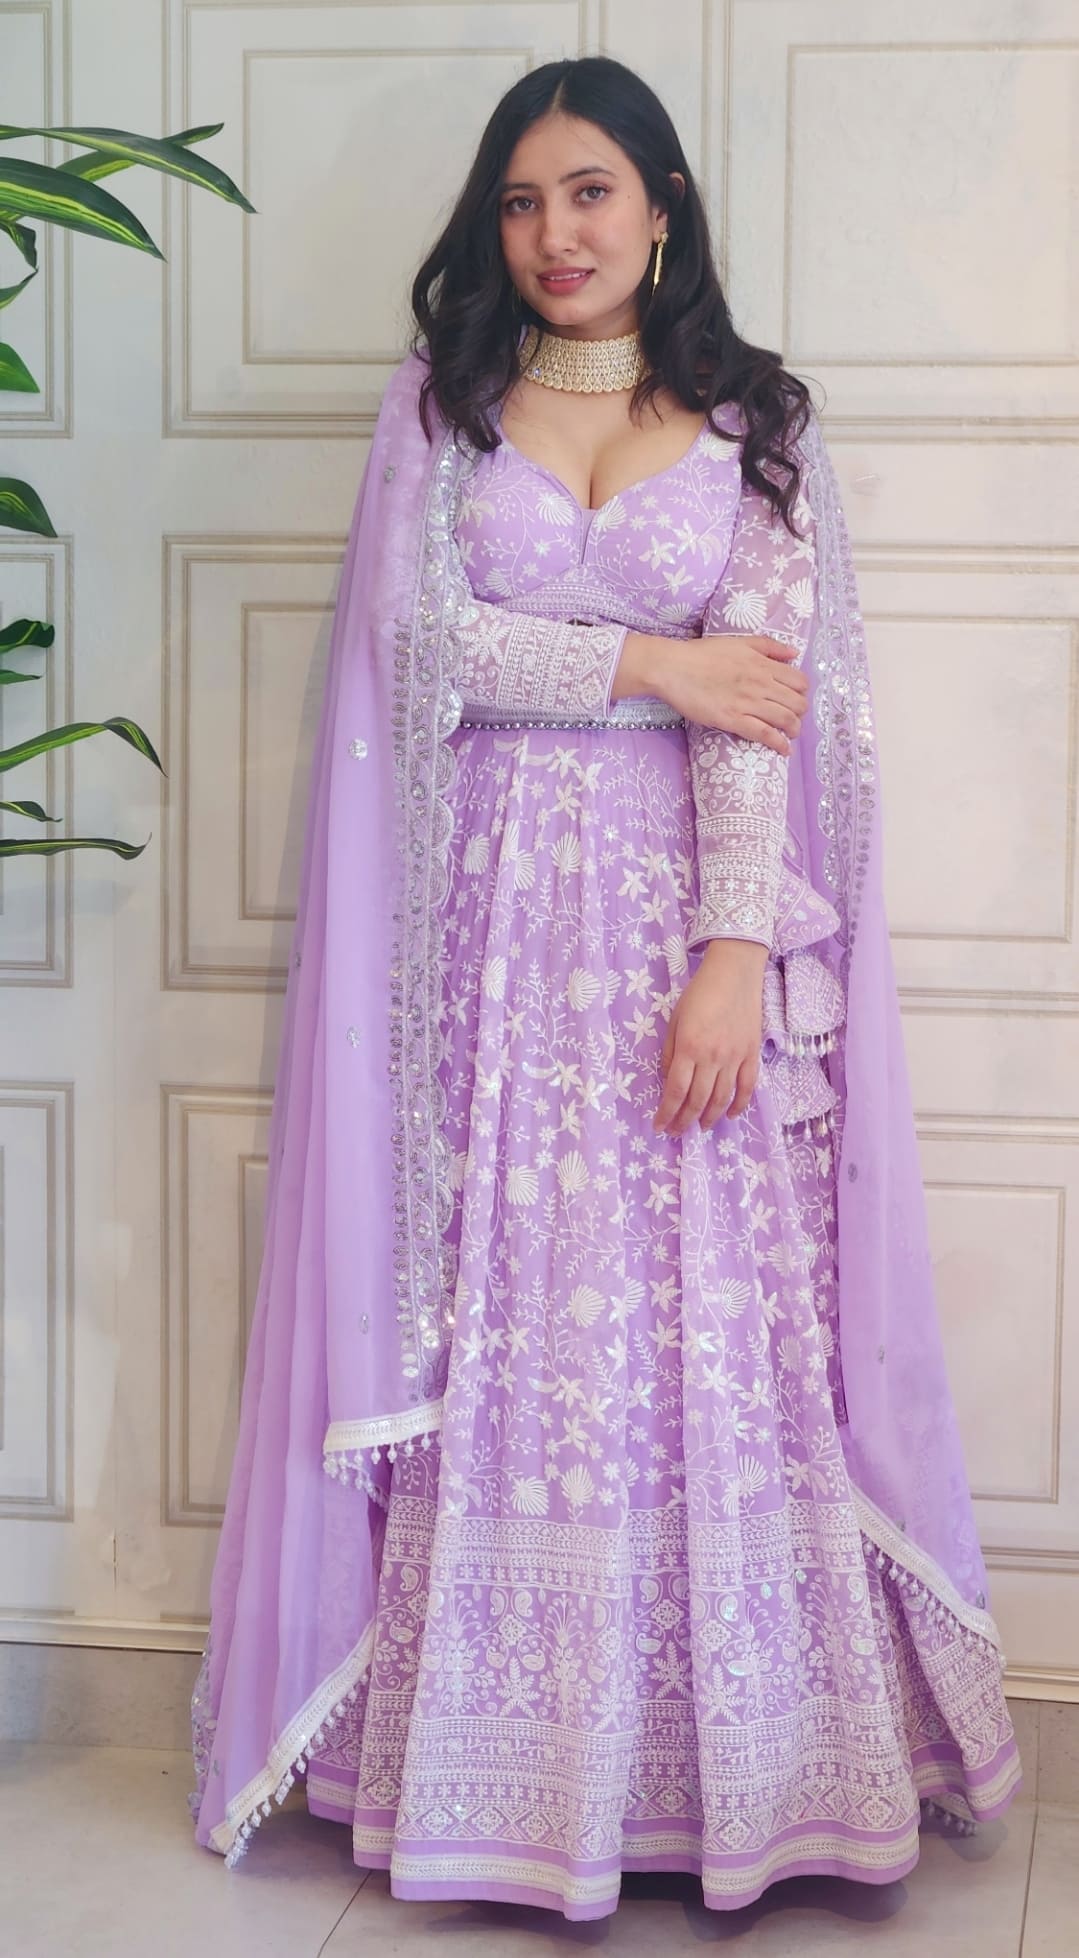 Light Lavender Thread and Colourful Sequin Embroidered Lehenga with Boutique Blouse and Dupatta